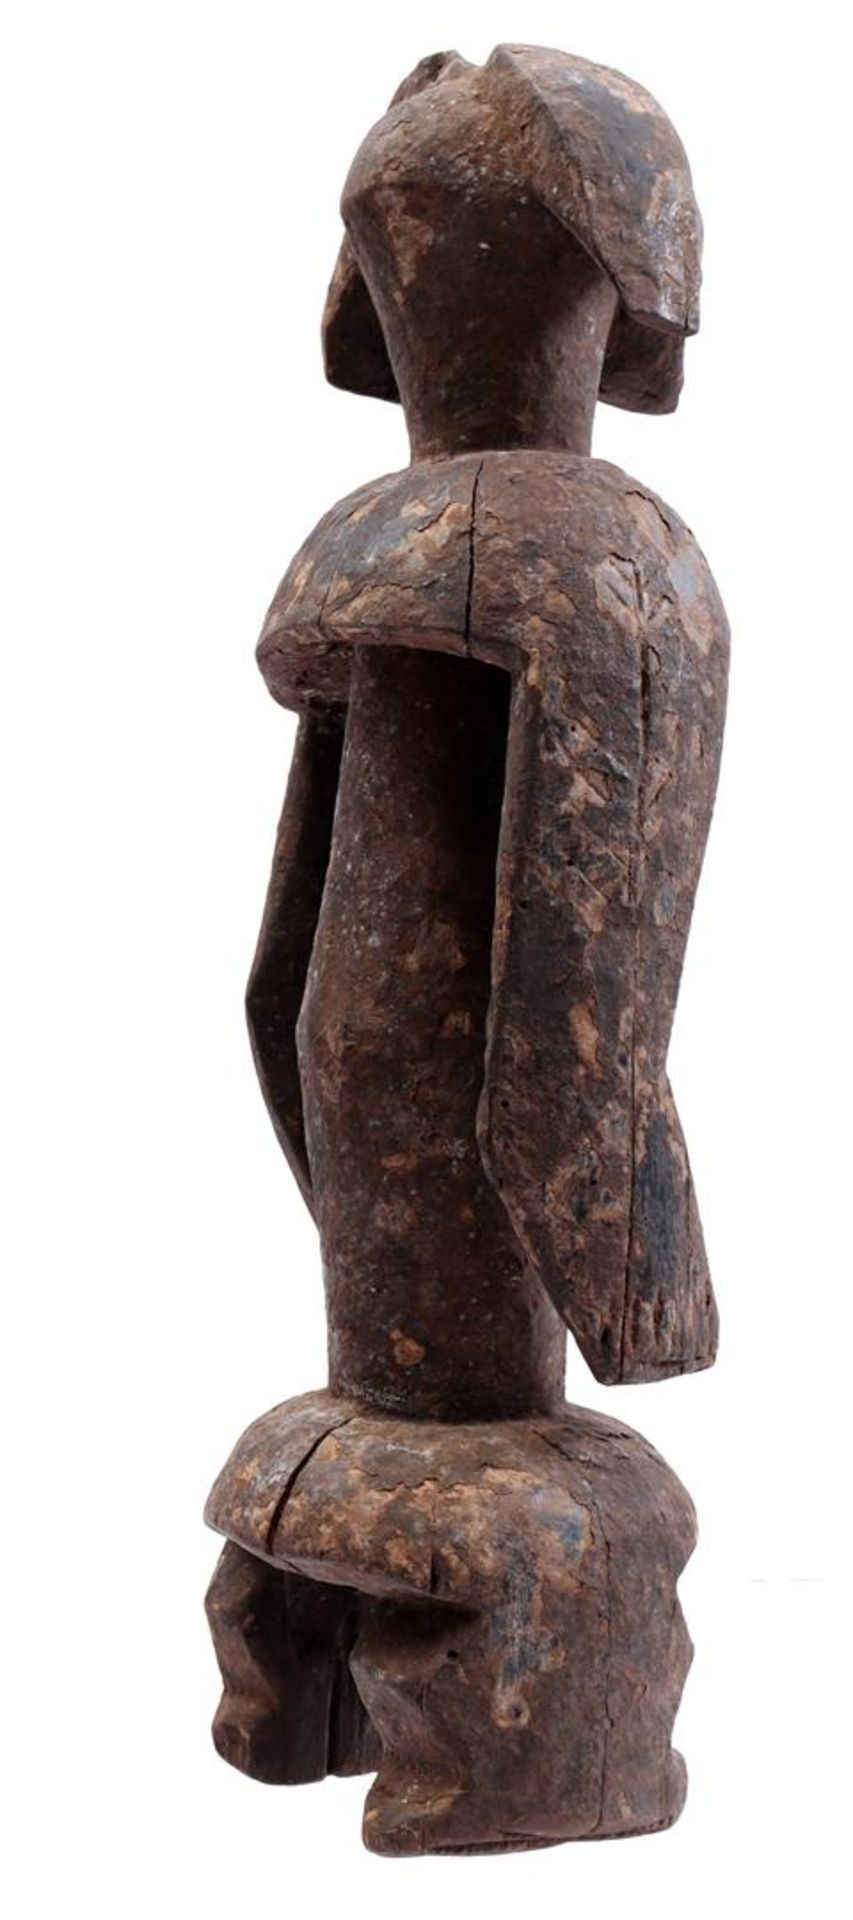 Wooden ceremonial statue of a woman, Mumuye - Image 2 of 4